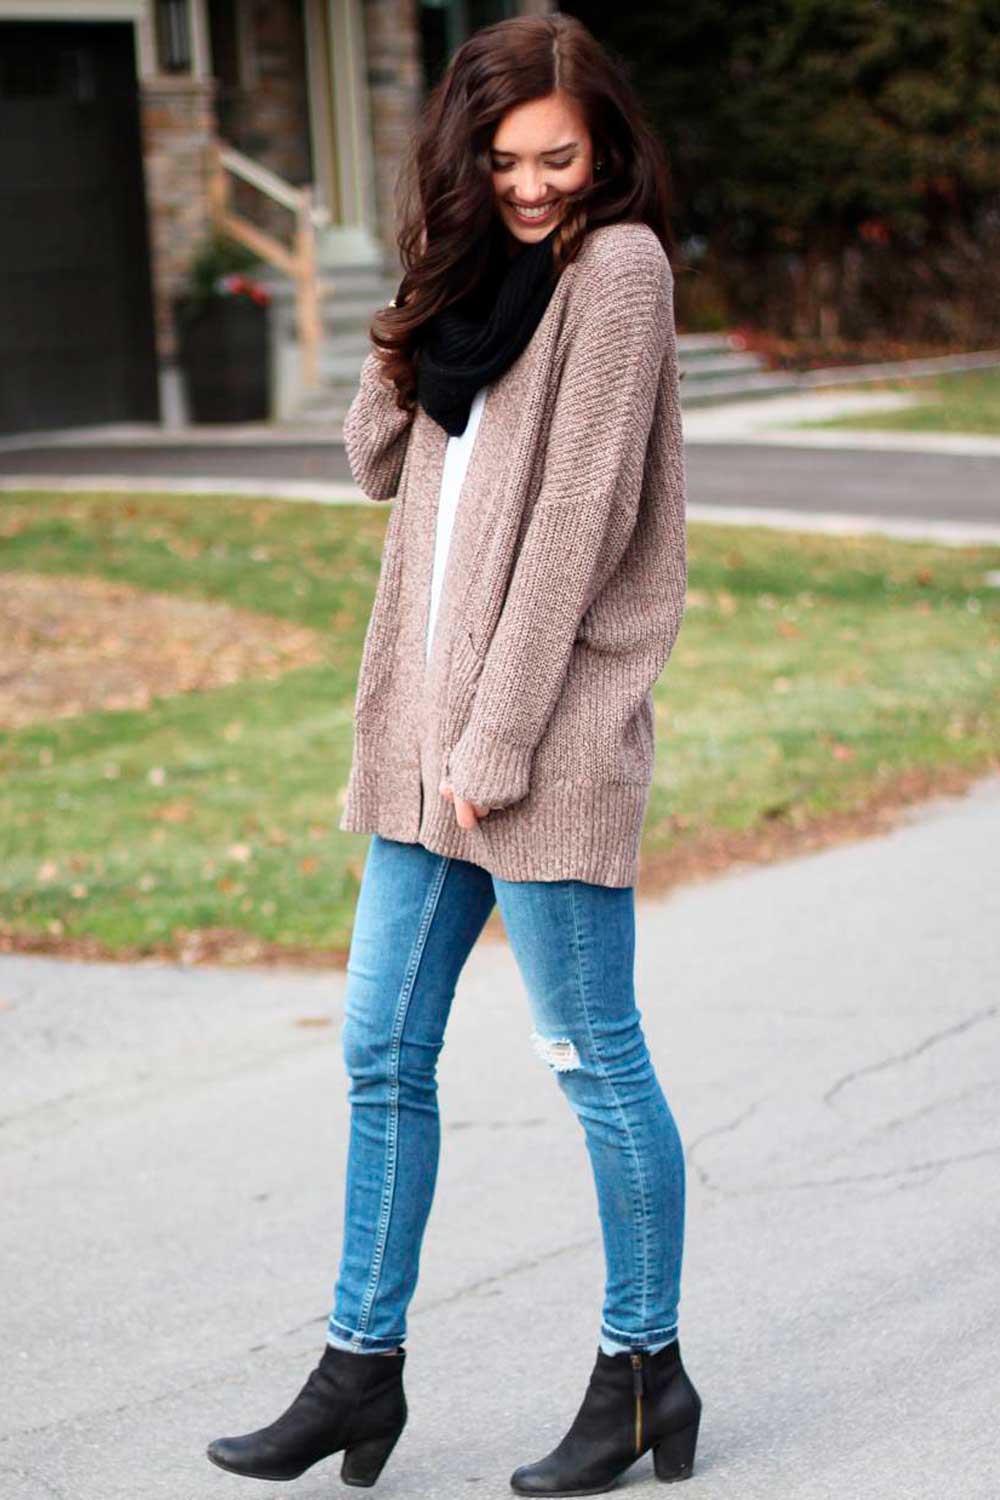 School Outfits with Elegant Cardigan